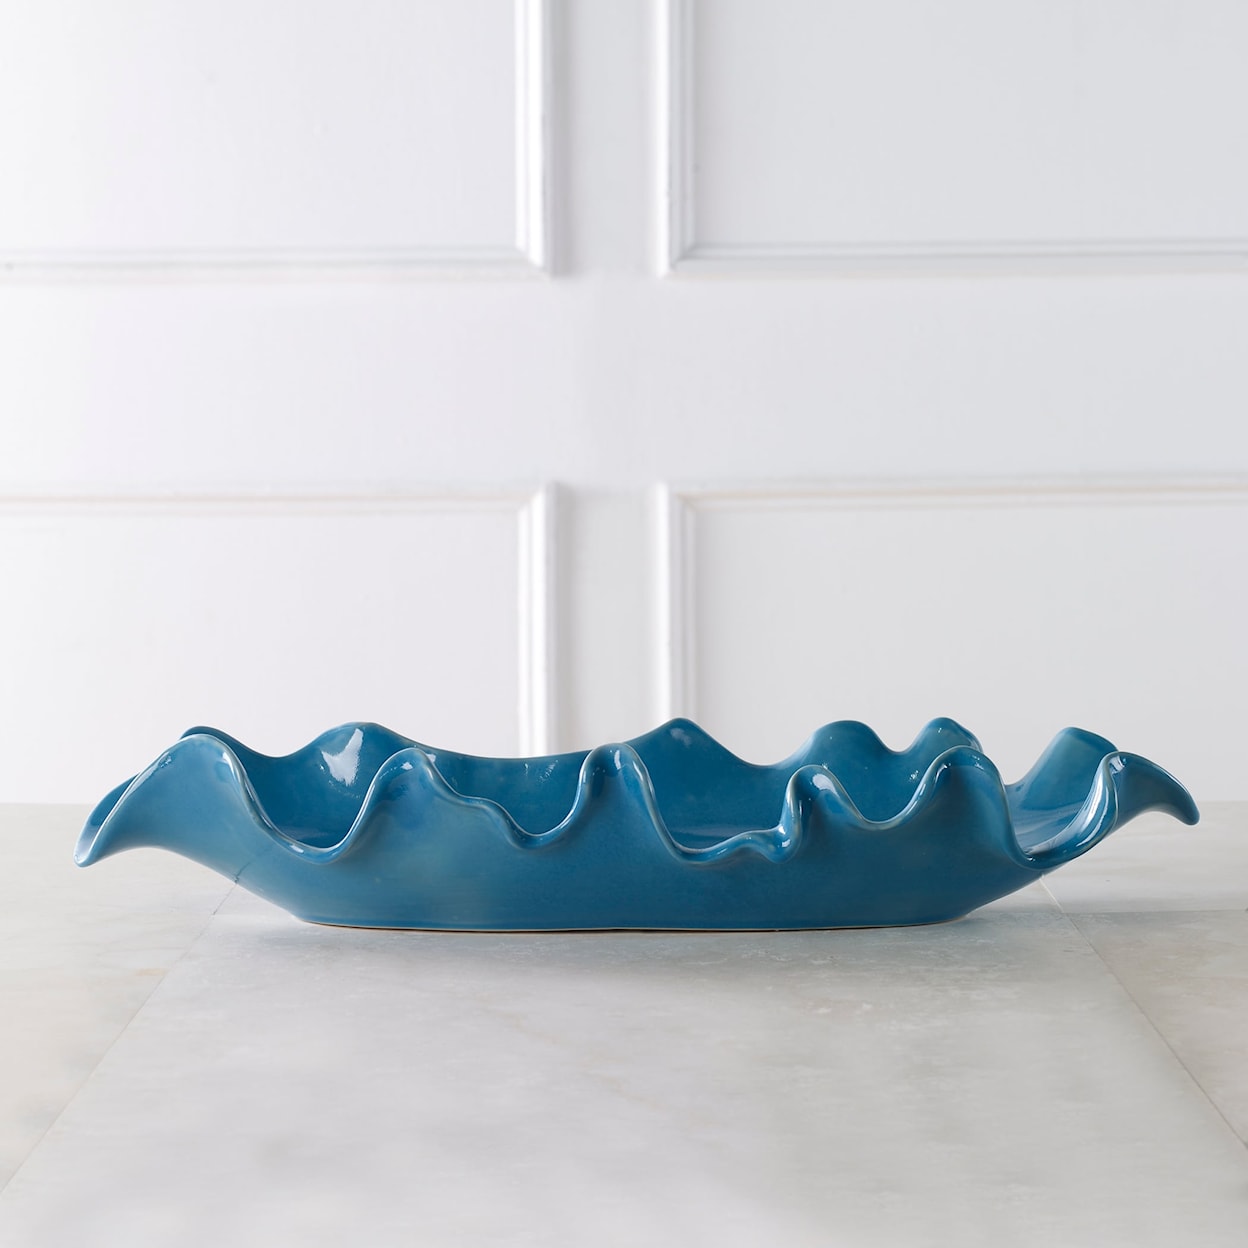 Uttermost Ruffled Feathers Ruffled Feathers Blue Bowl